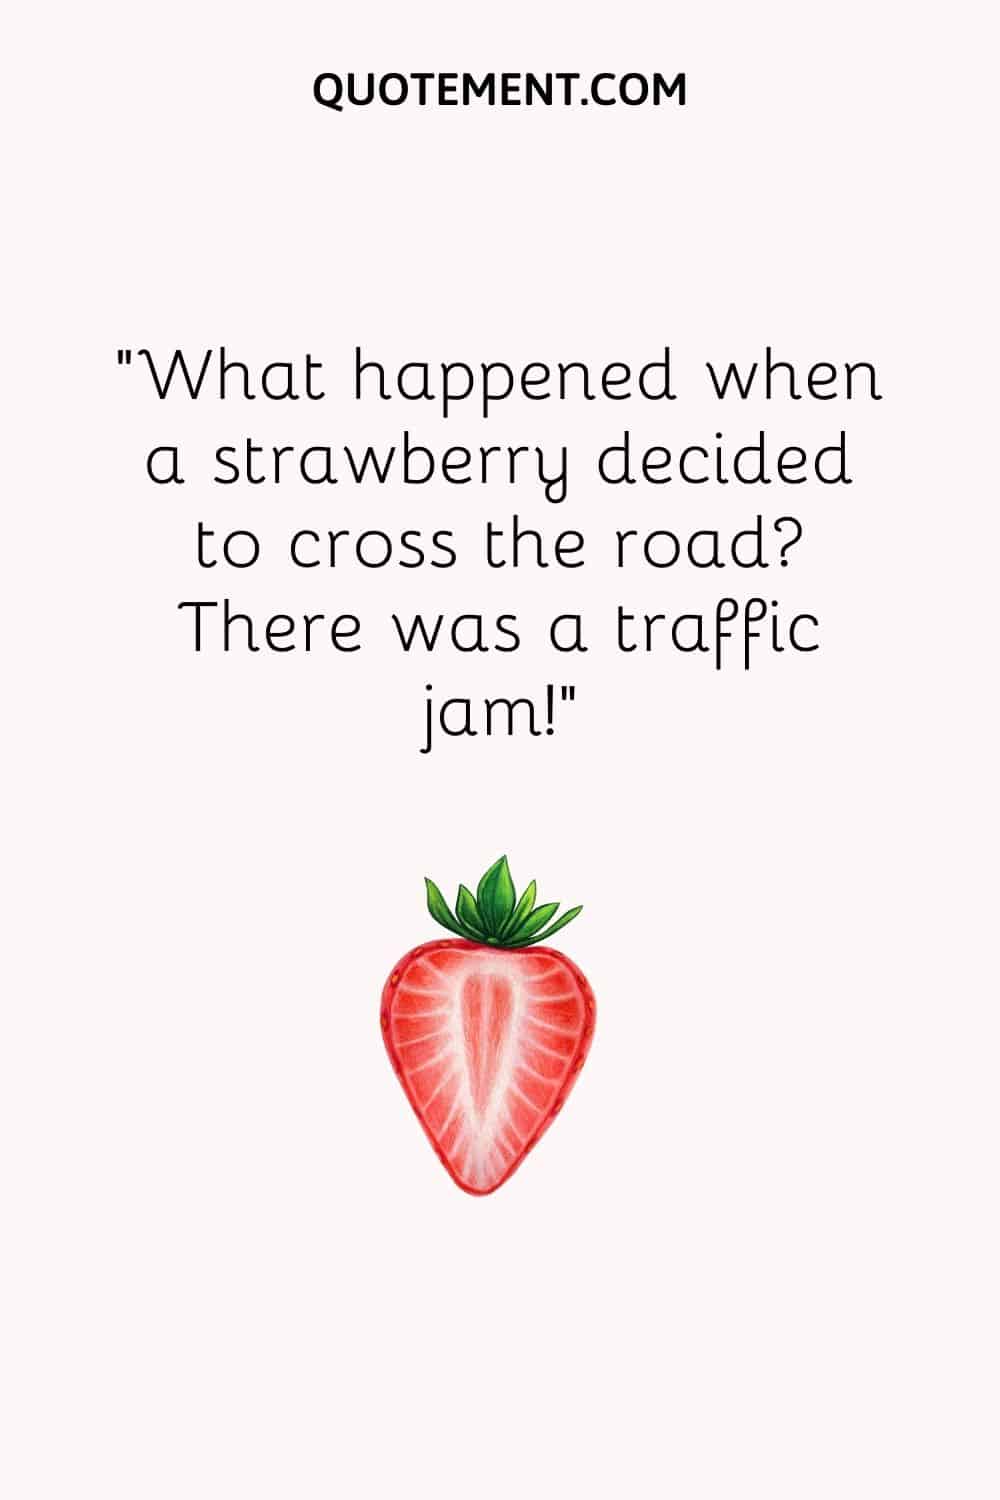 What happened when a strawberry decided to cross the road